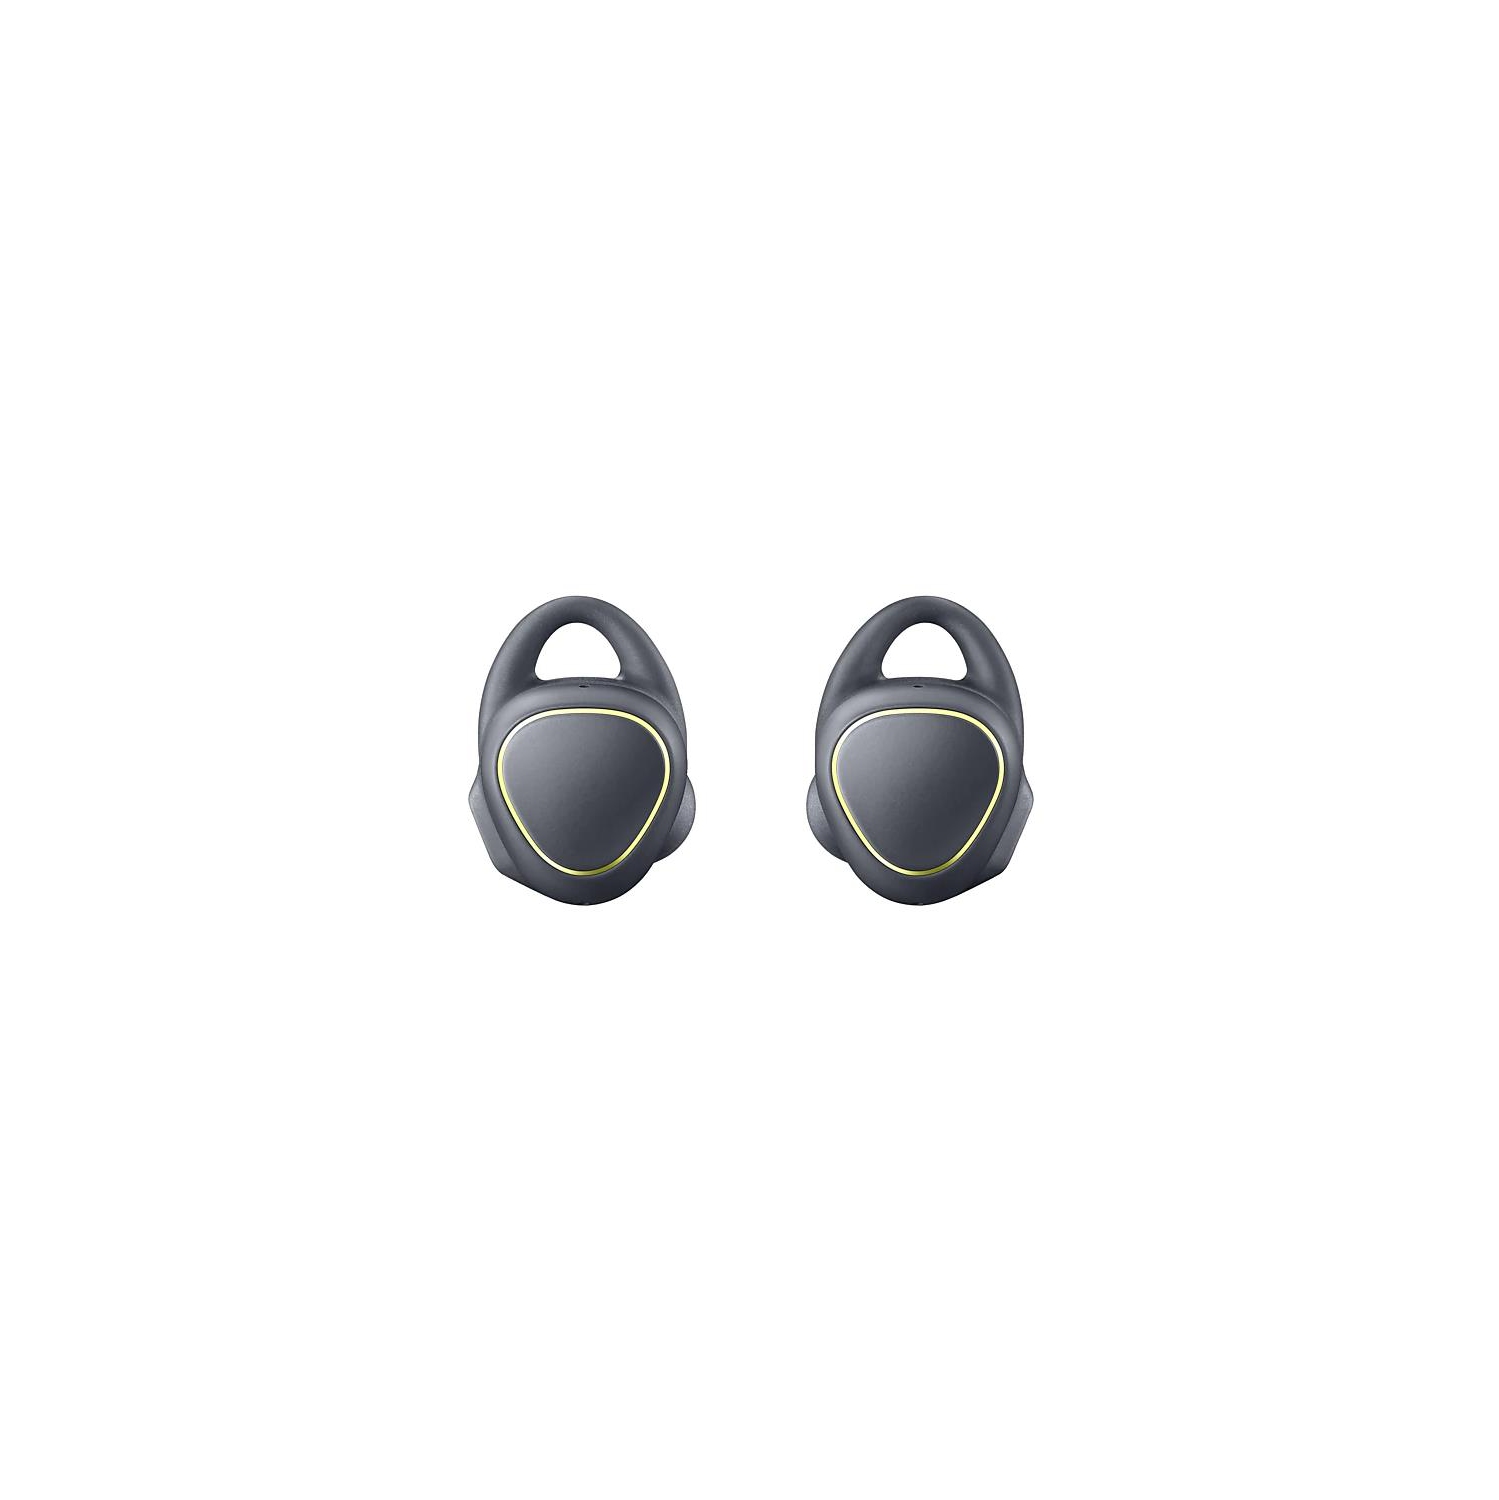 Samsung Gear IconX SM-R150NZKAXAR Cord-free Fitness Earbuds with Activity Tracker - Black - Open Box